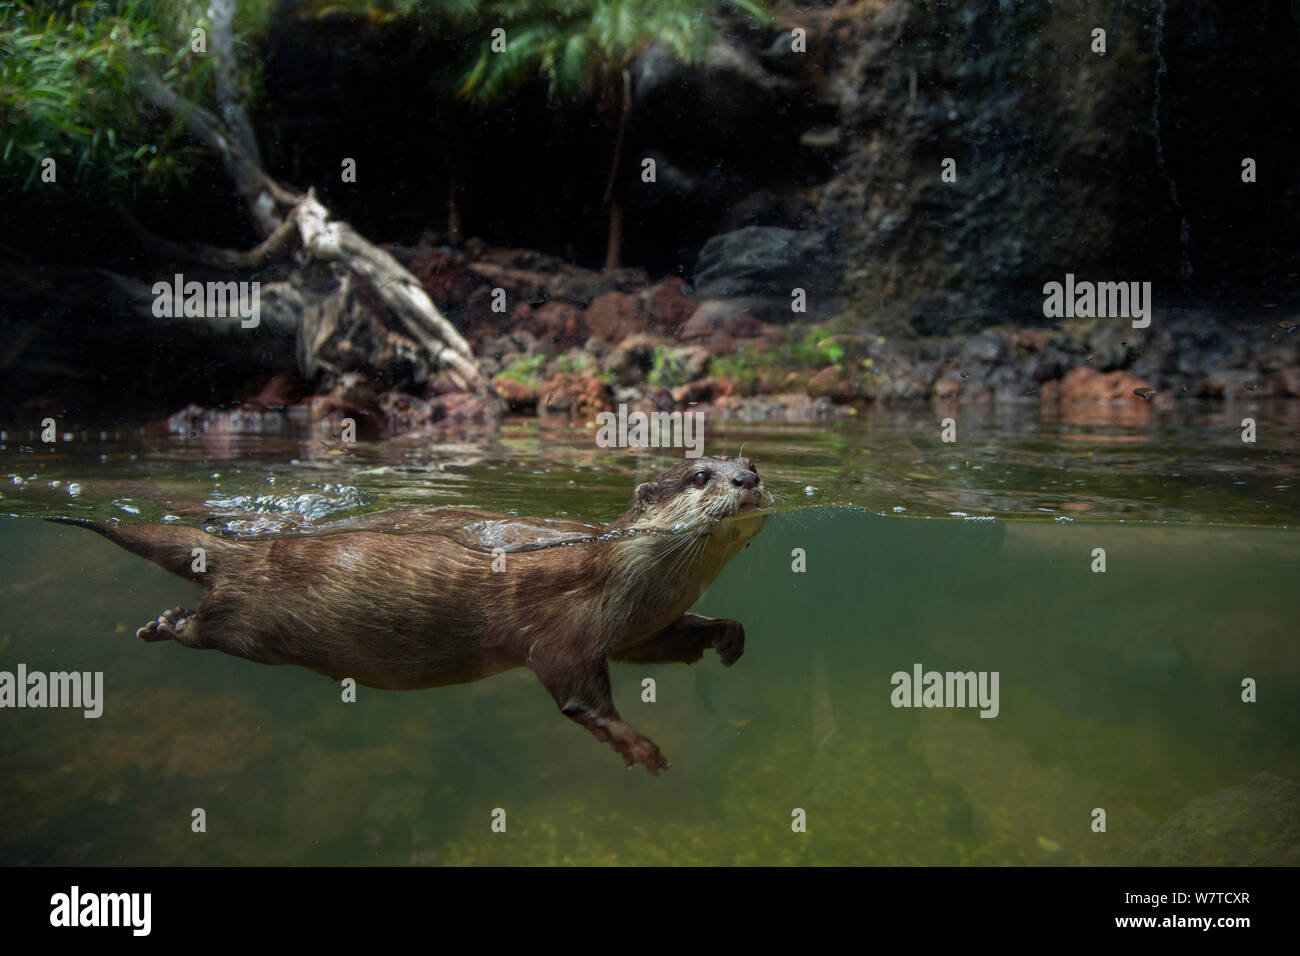 Split-level of an Oriental small clawed otter (Aonyx cinerea) underwater, captive. Stock Photo